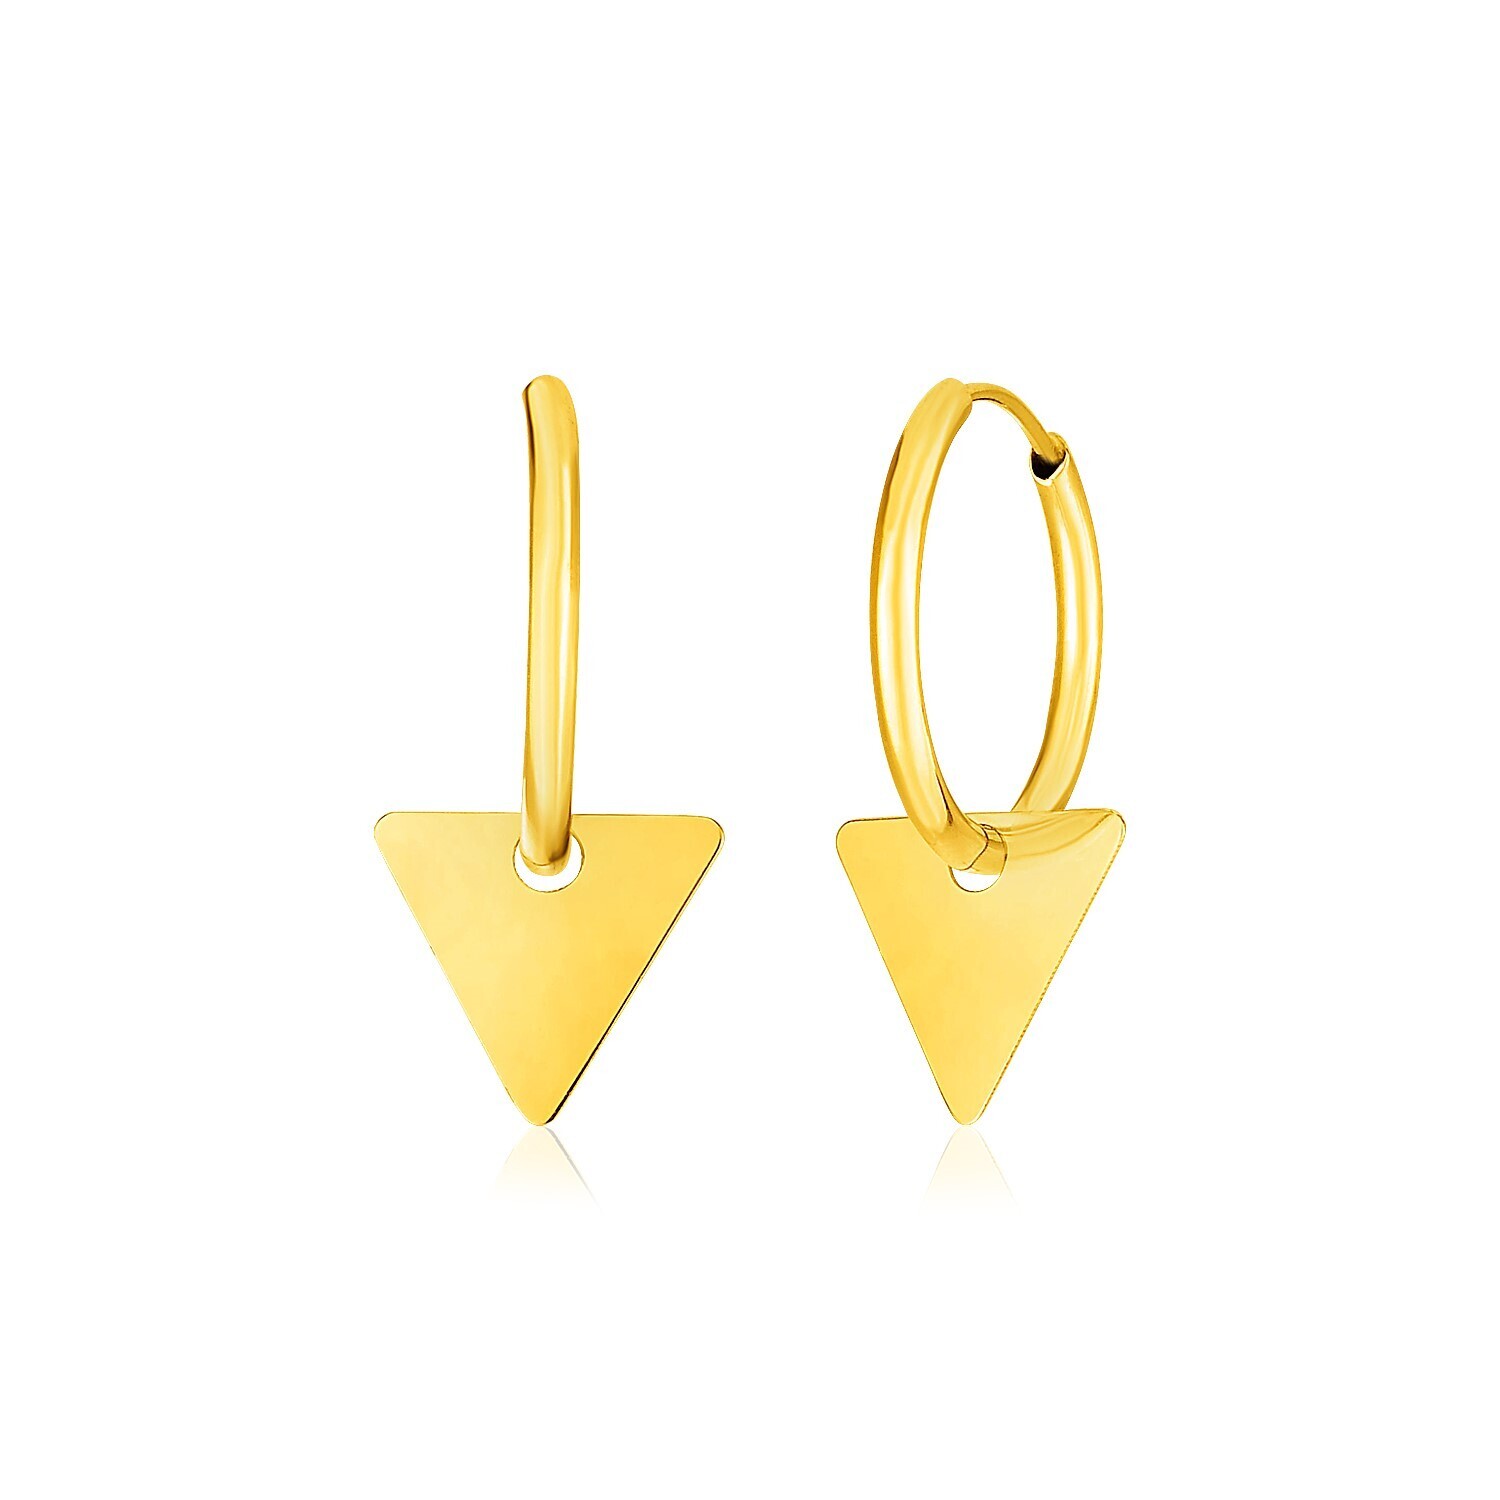 14k Yellow Gold Huggie Style Hoop Earrings with Triangle Drops